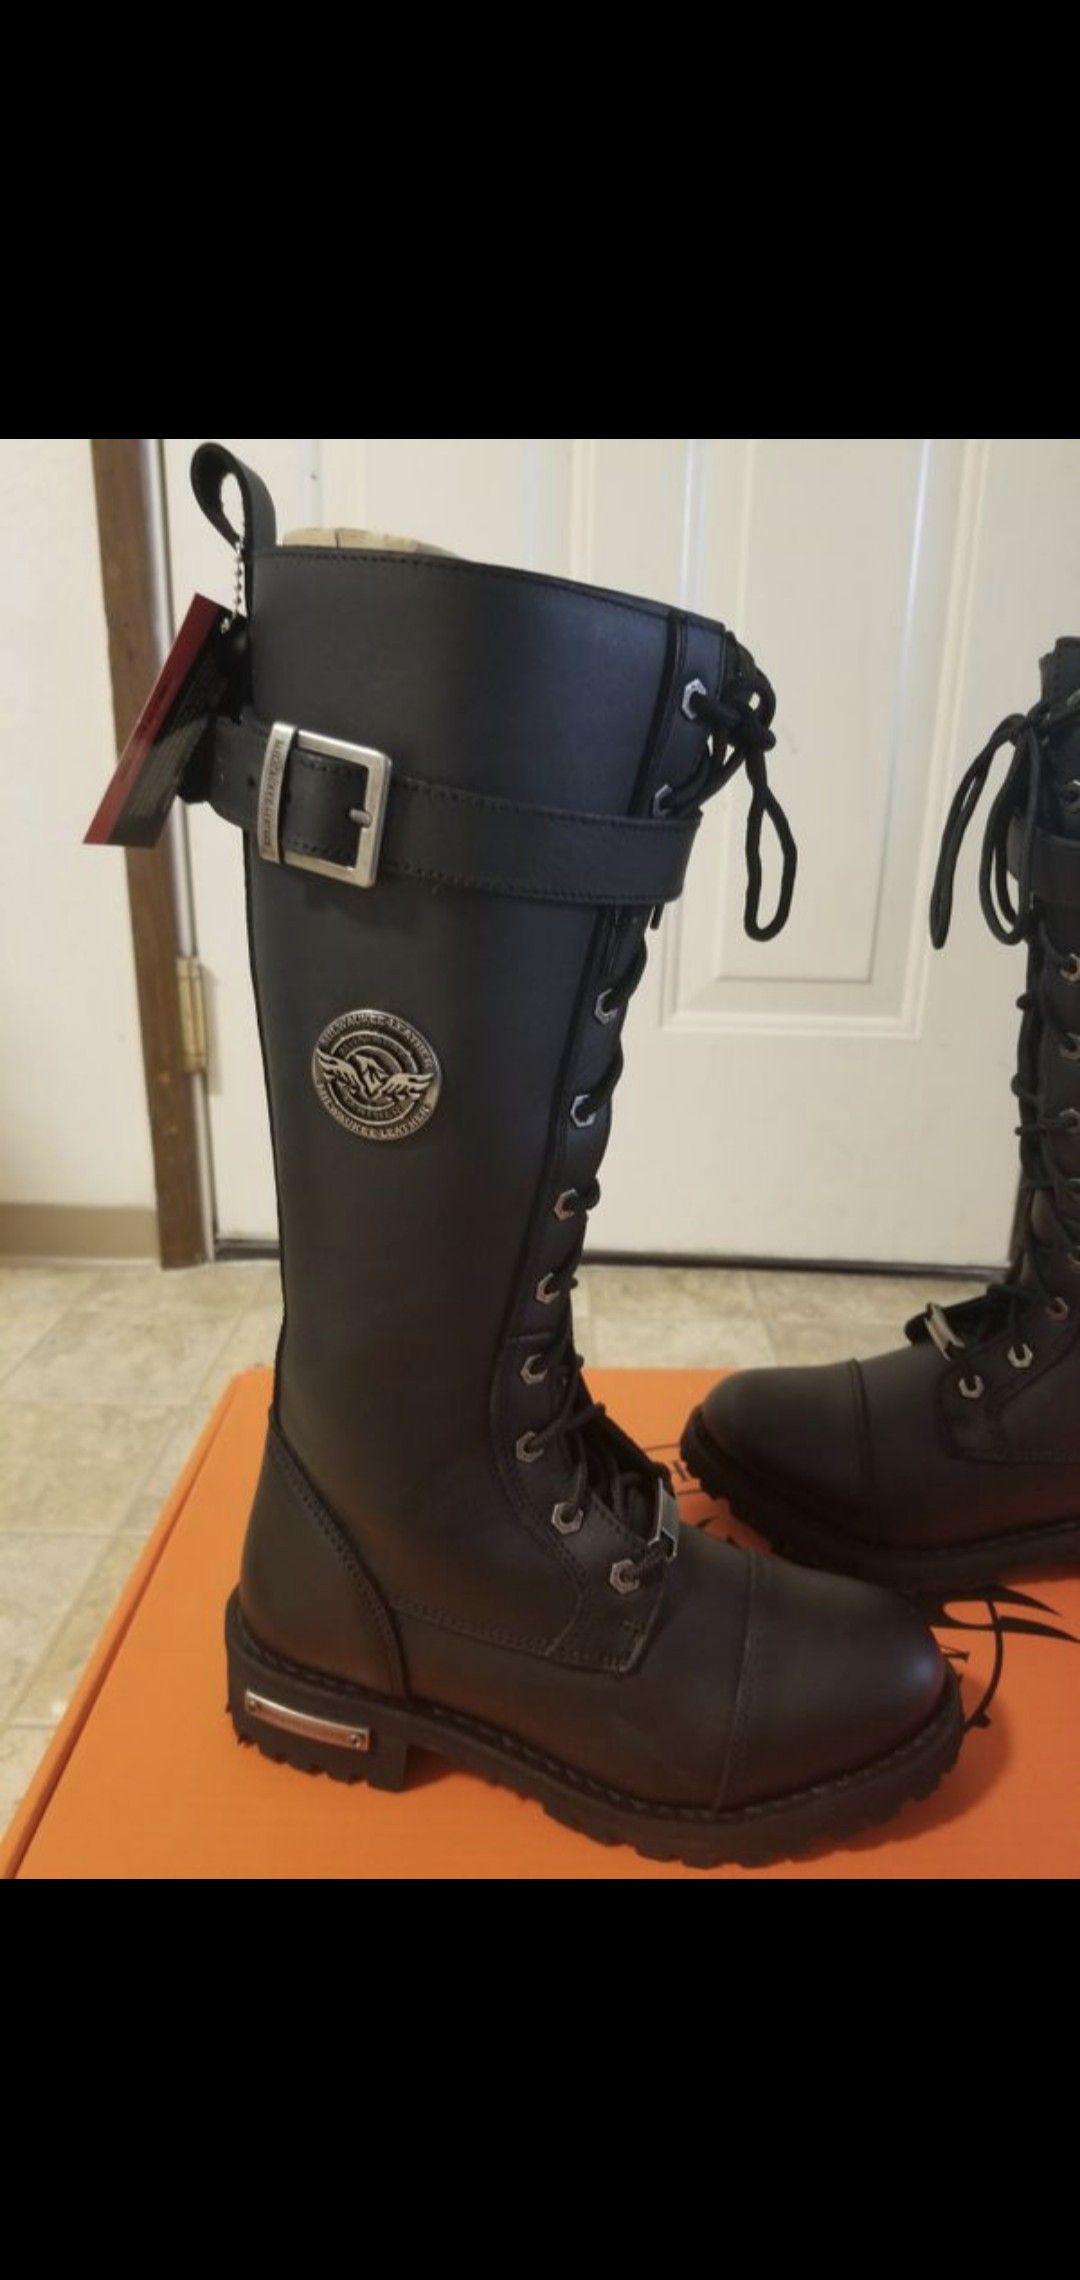 Women's leather boots, brand new in box